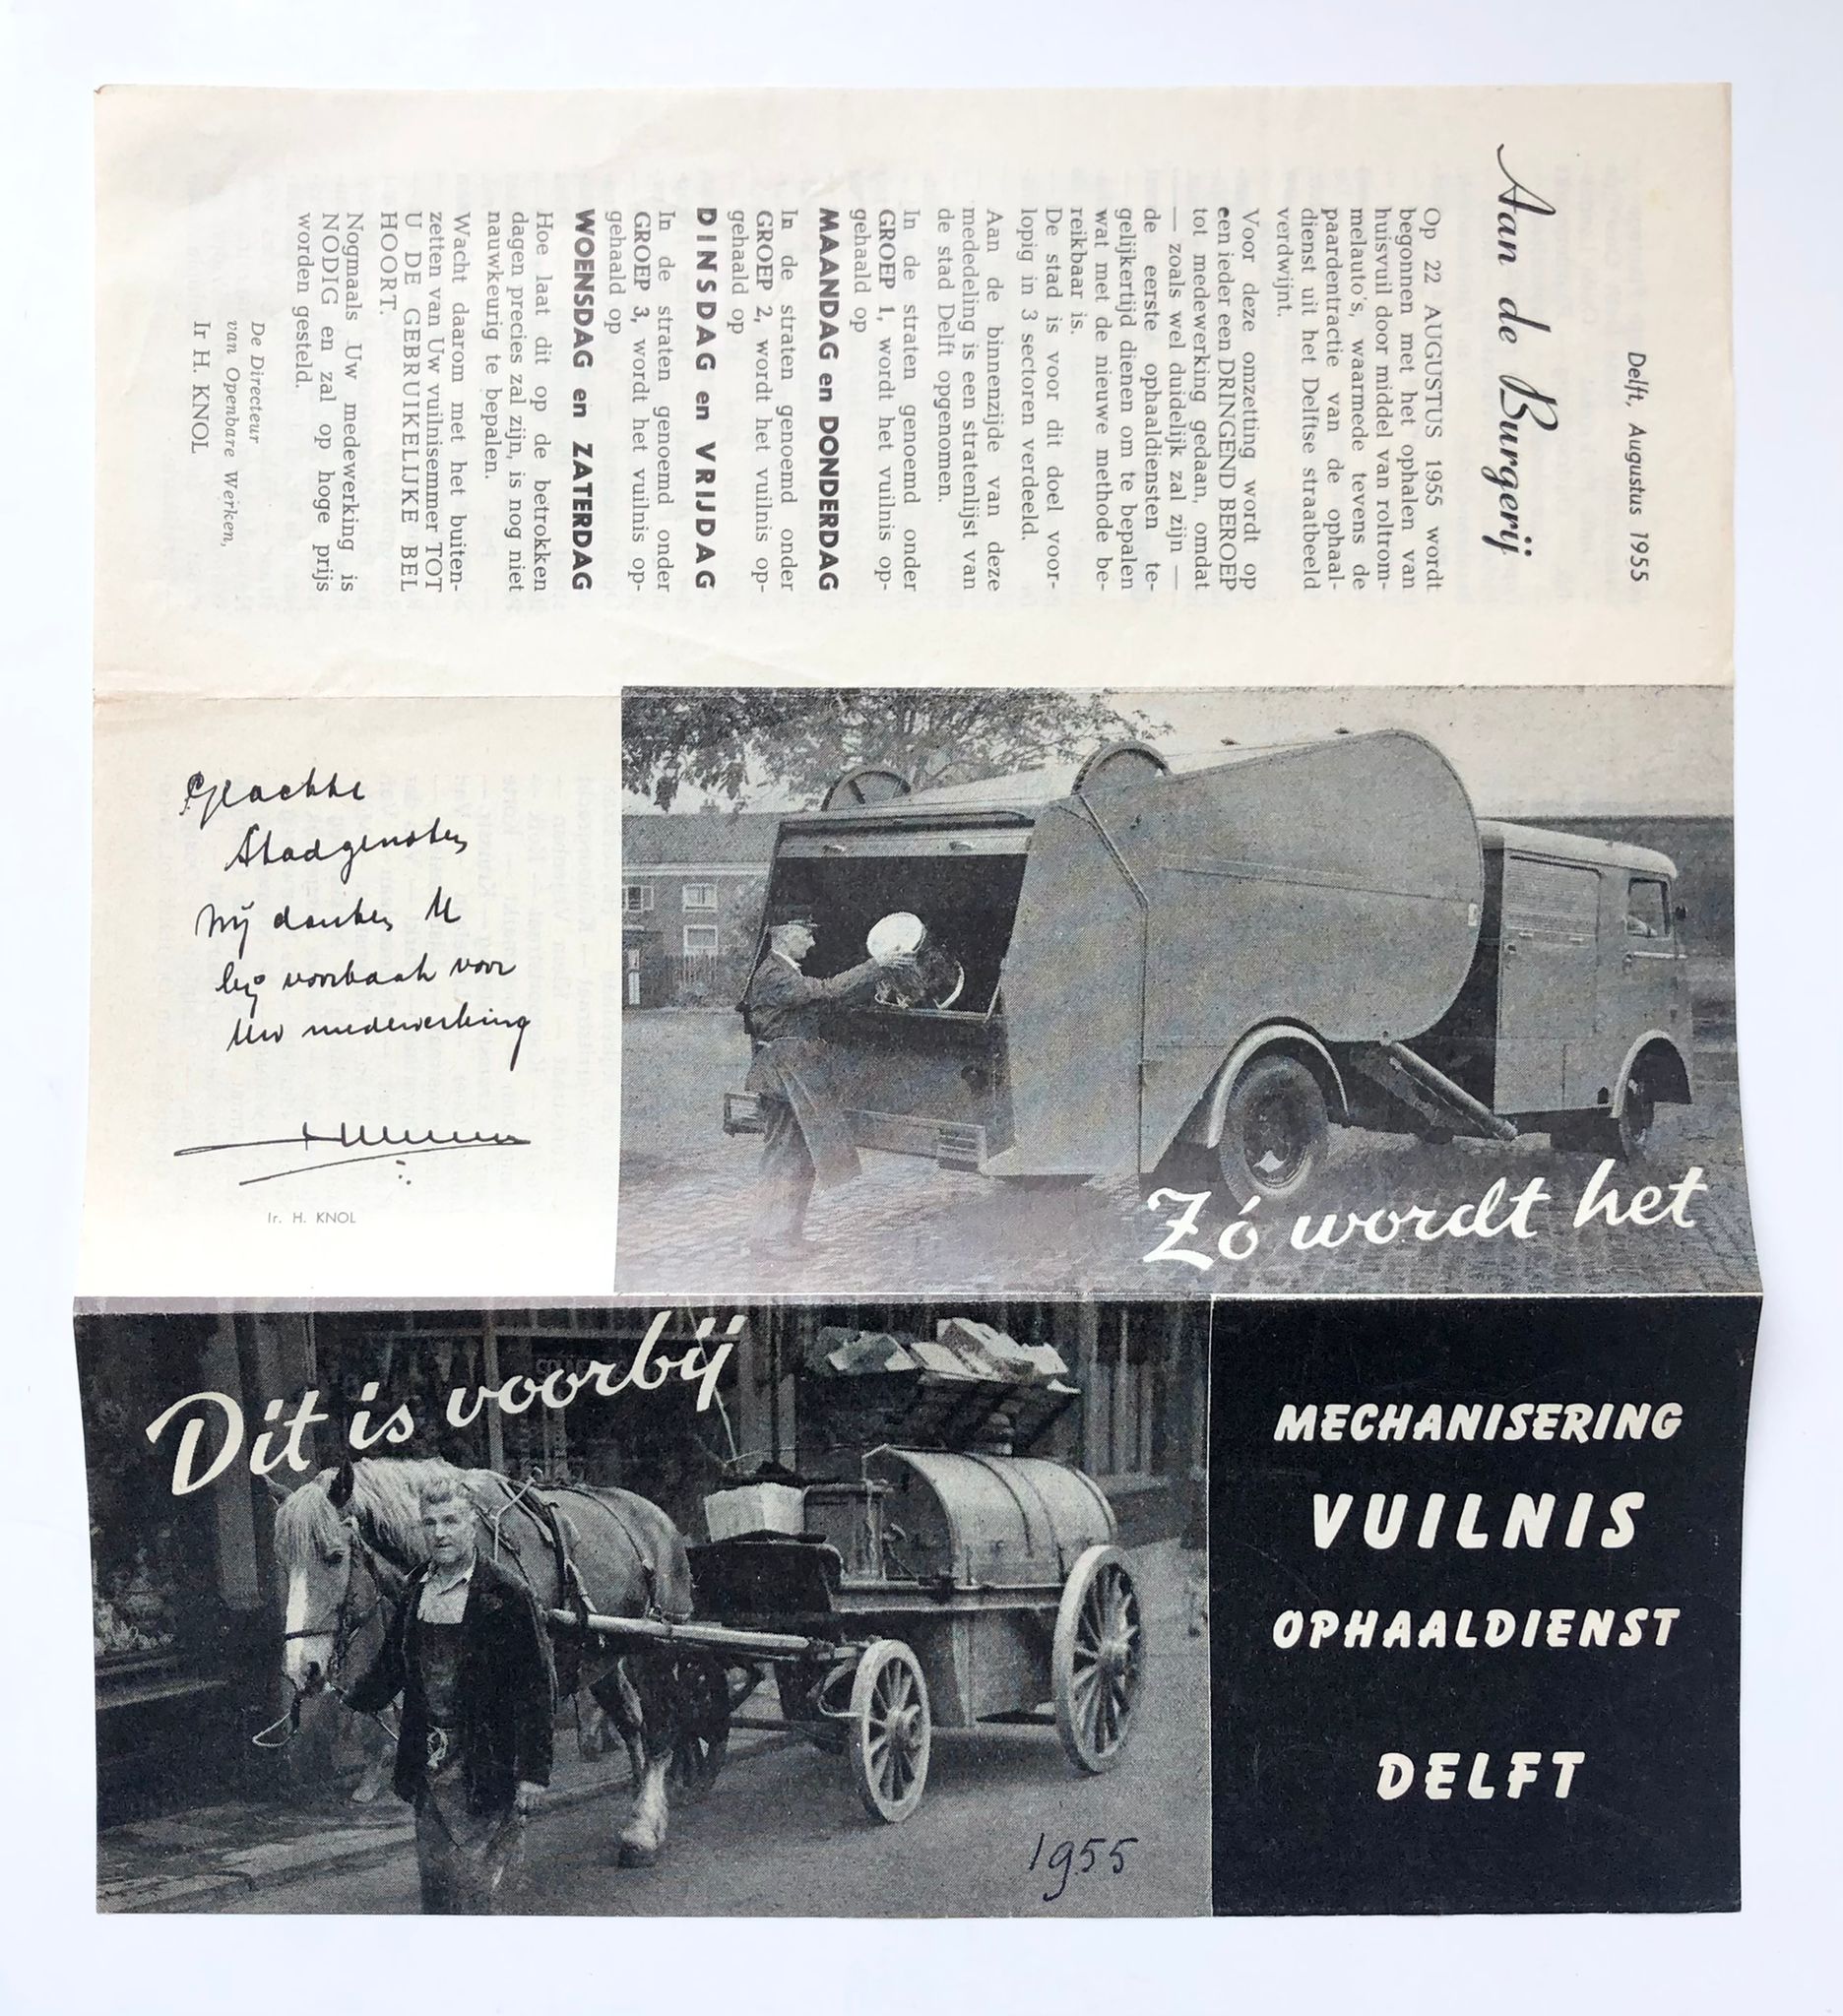 [Printed publication, garbage collection service, 1955] Flyer by dienst Openbare Werken Delft (dir. H. Knol) with regard to the replacement of horses by garbage trucks (roltrommelauto's) for the garbage collection (vuilnisophaaldienst), 1955. Printed, 2 pp.